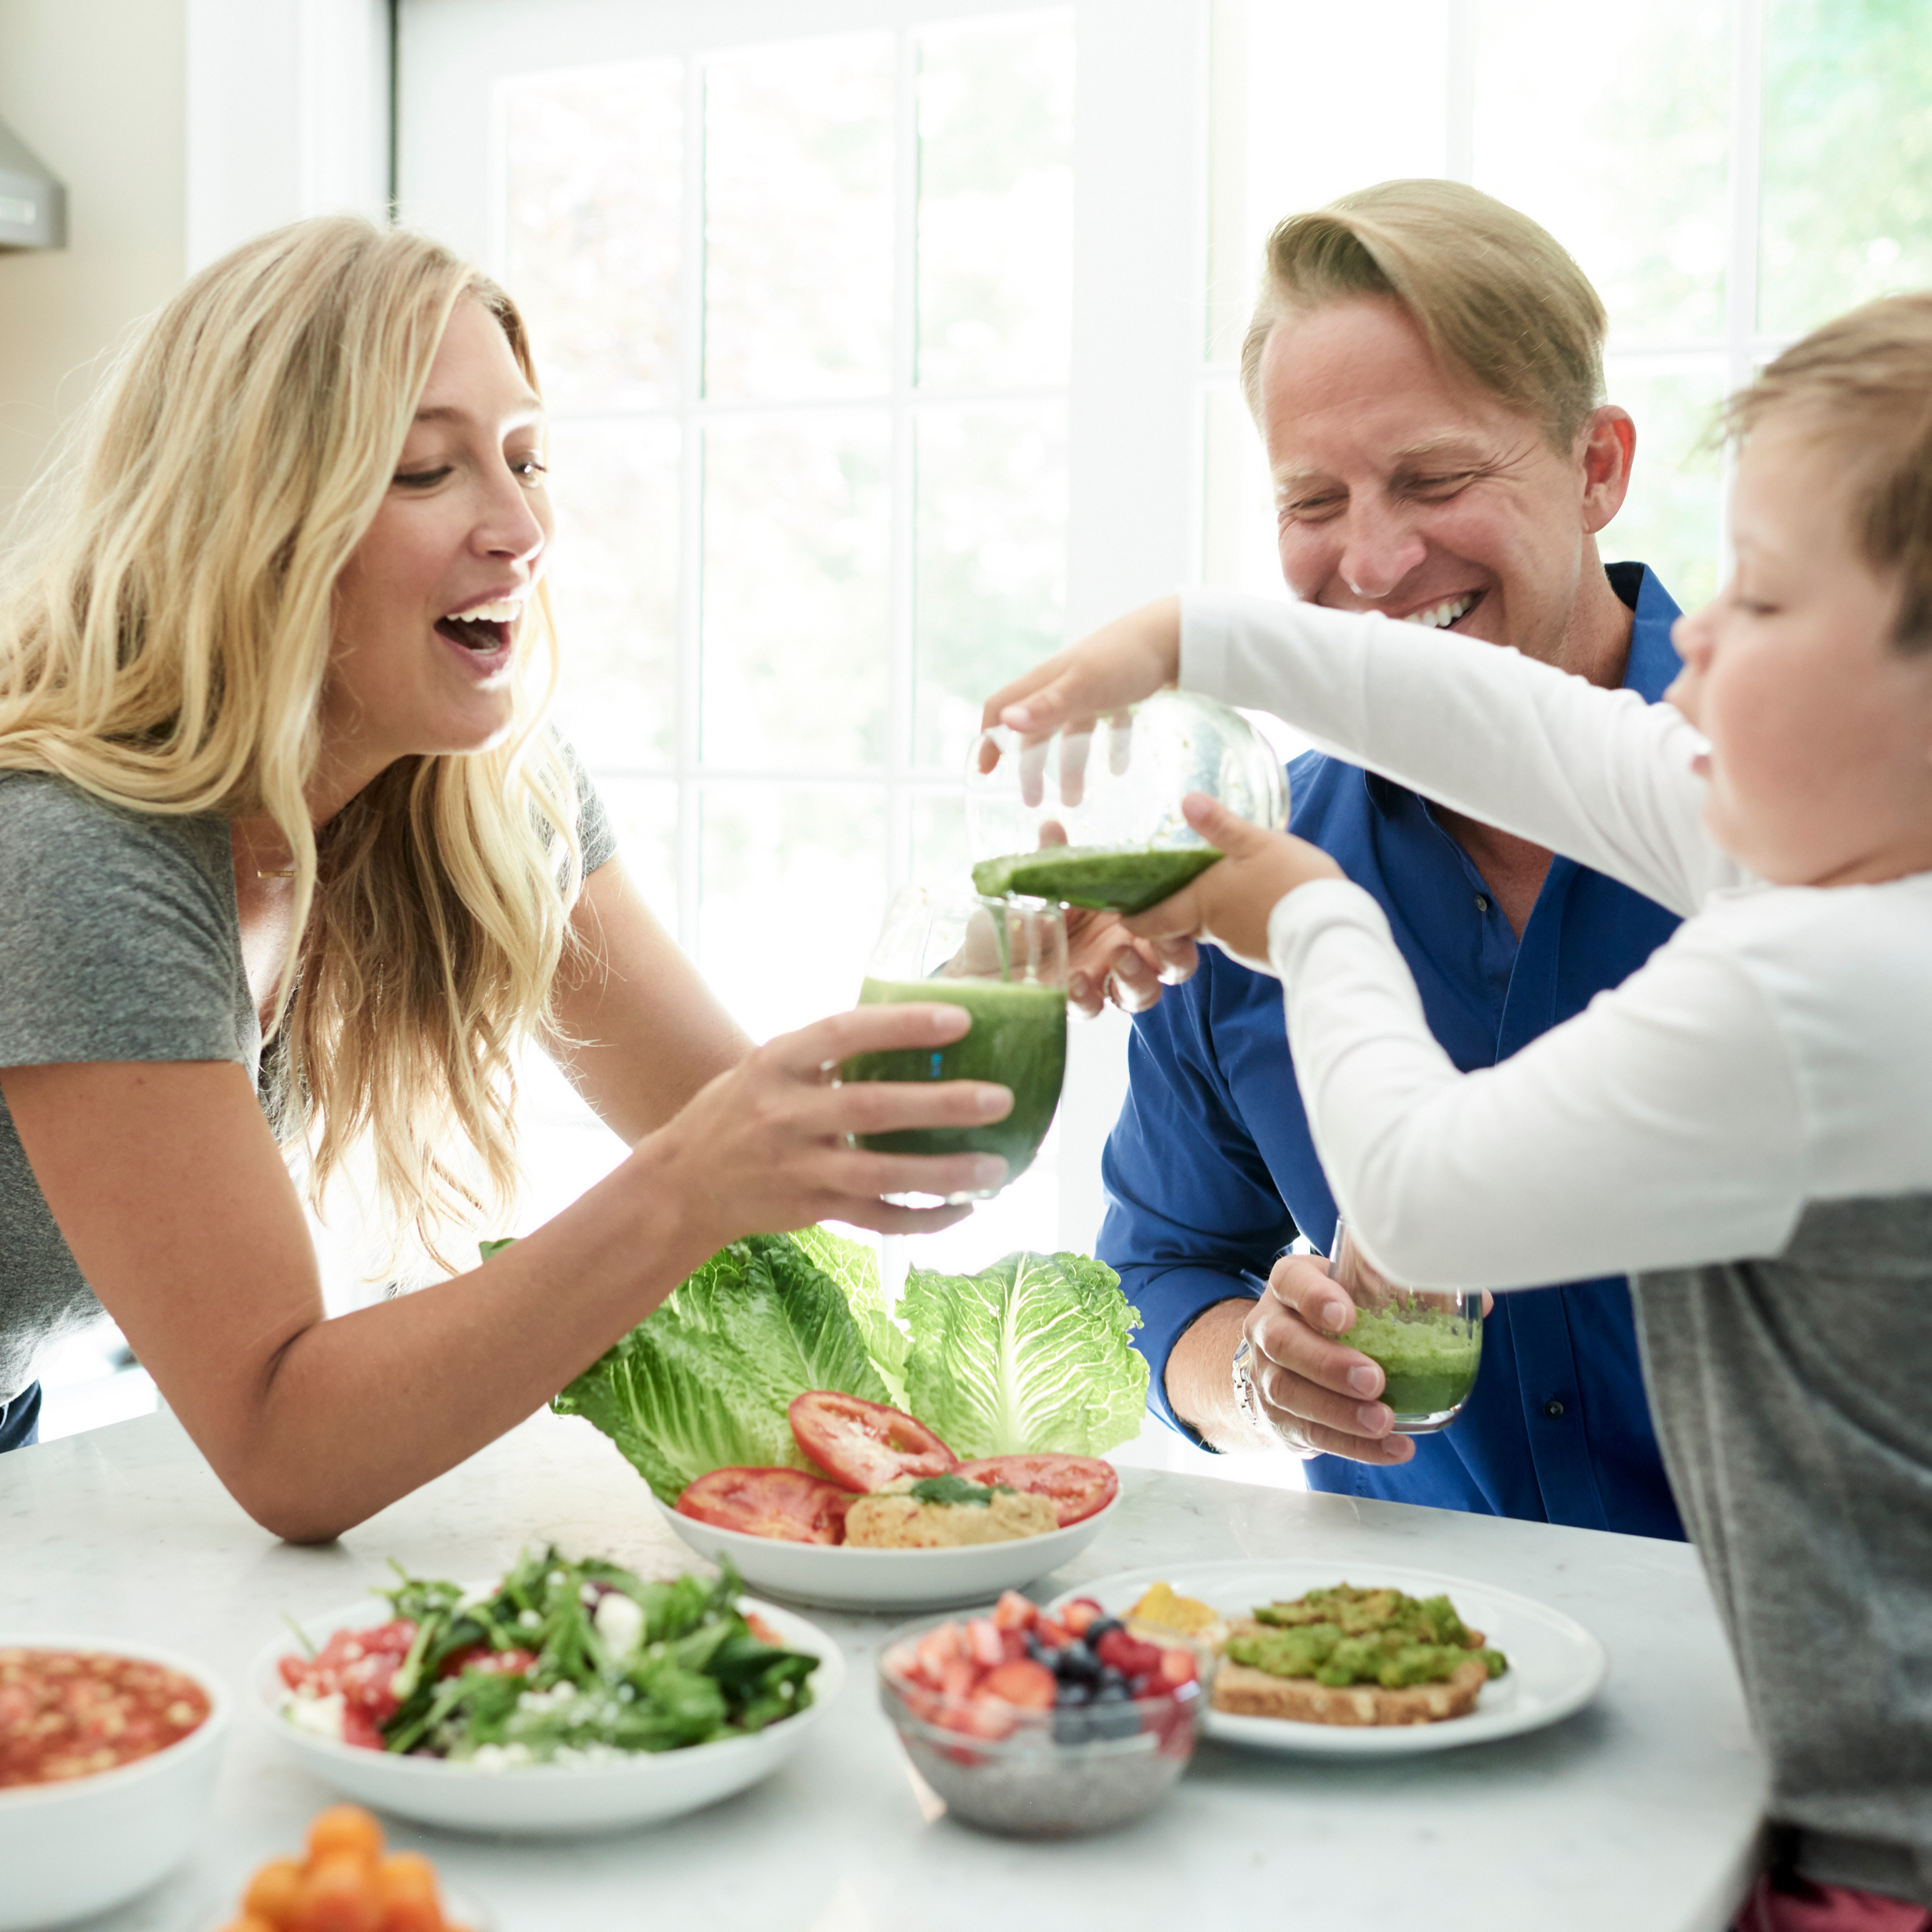 SWW™ Family Meal Planning Guide